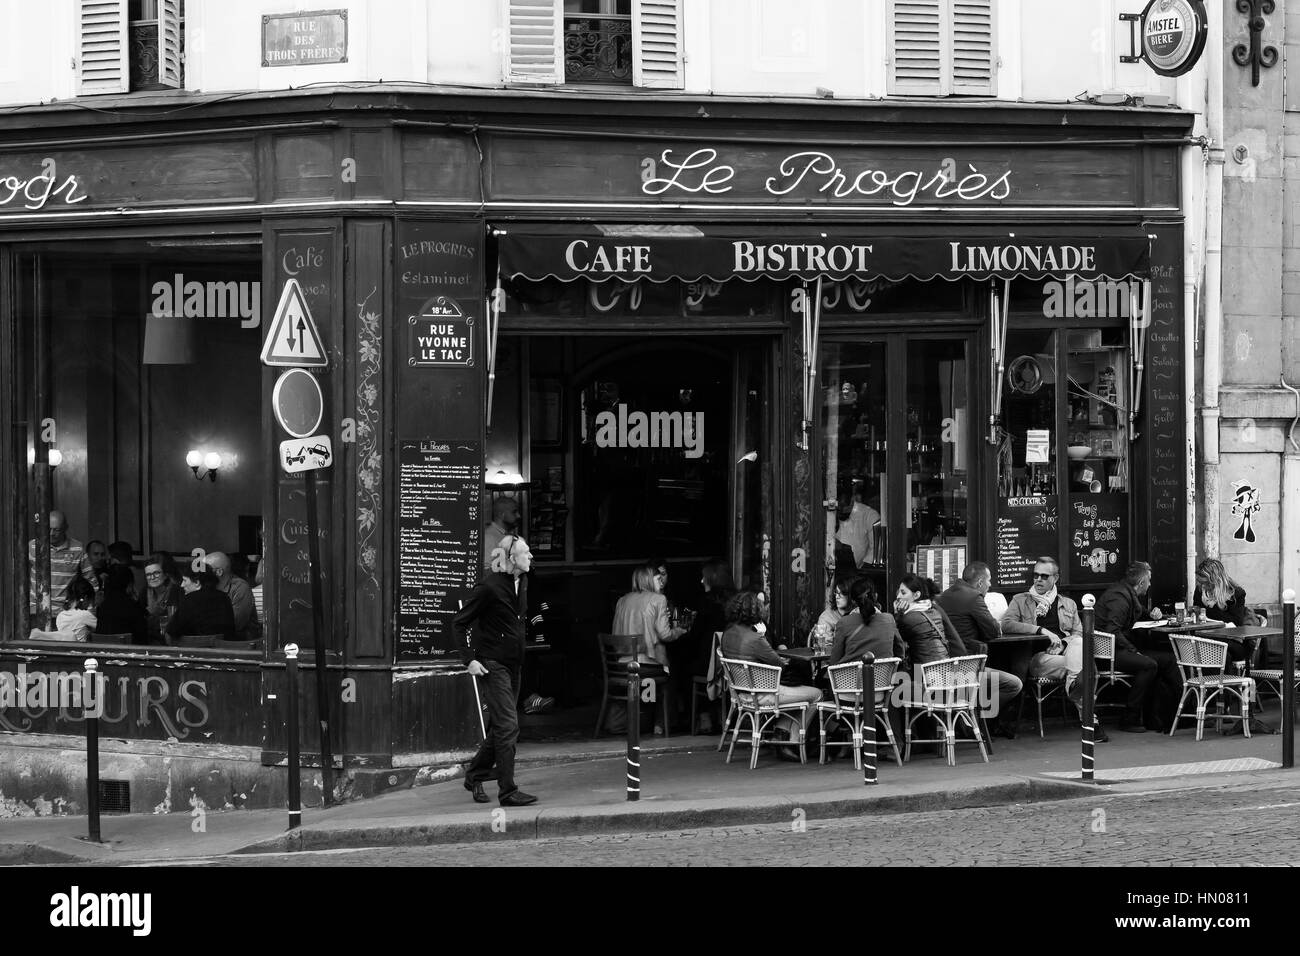 Cafe scene in paris Black and White Stock Photos & Images - Alamy